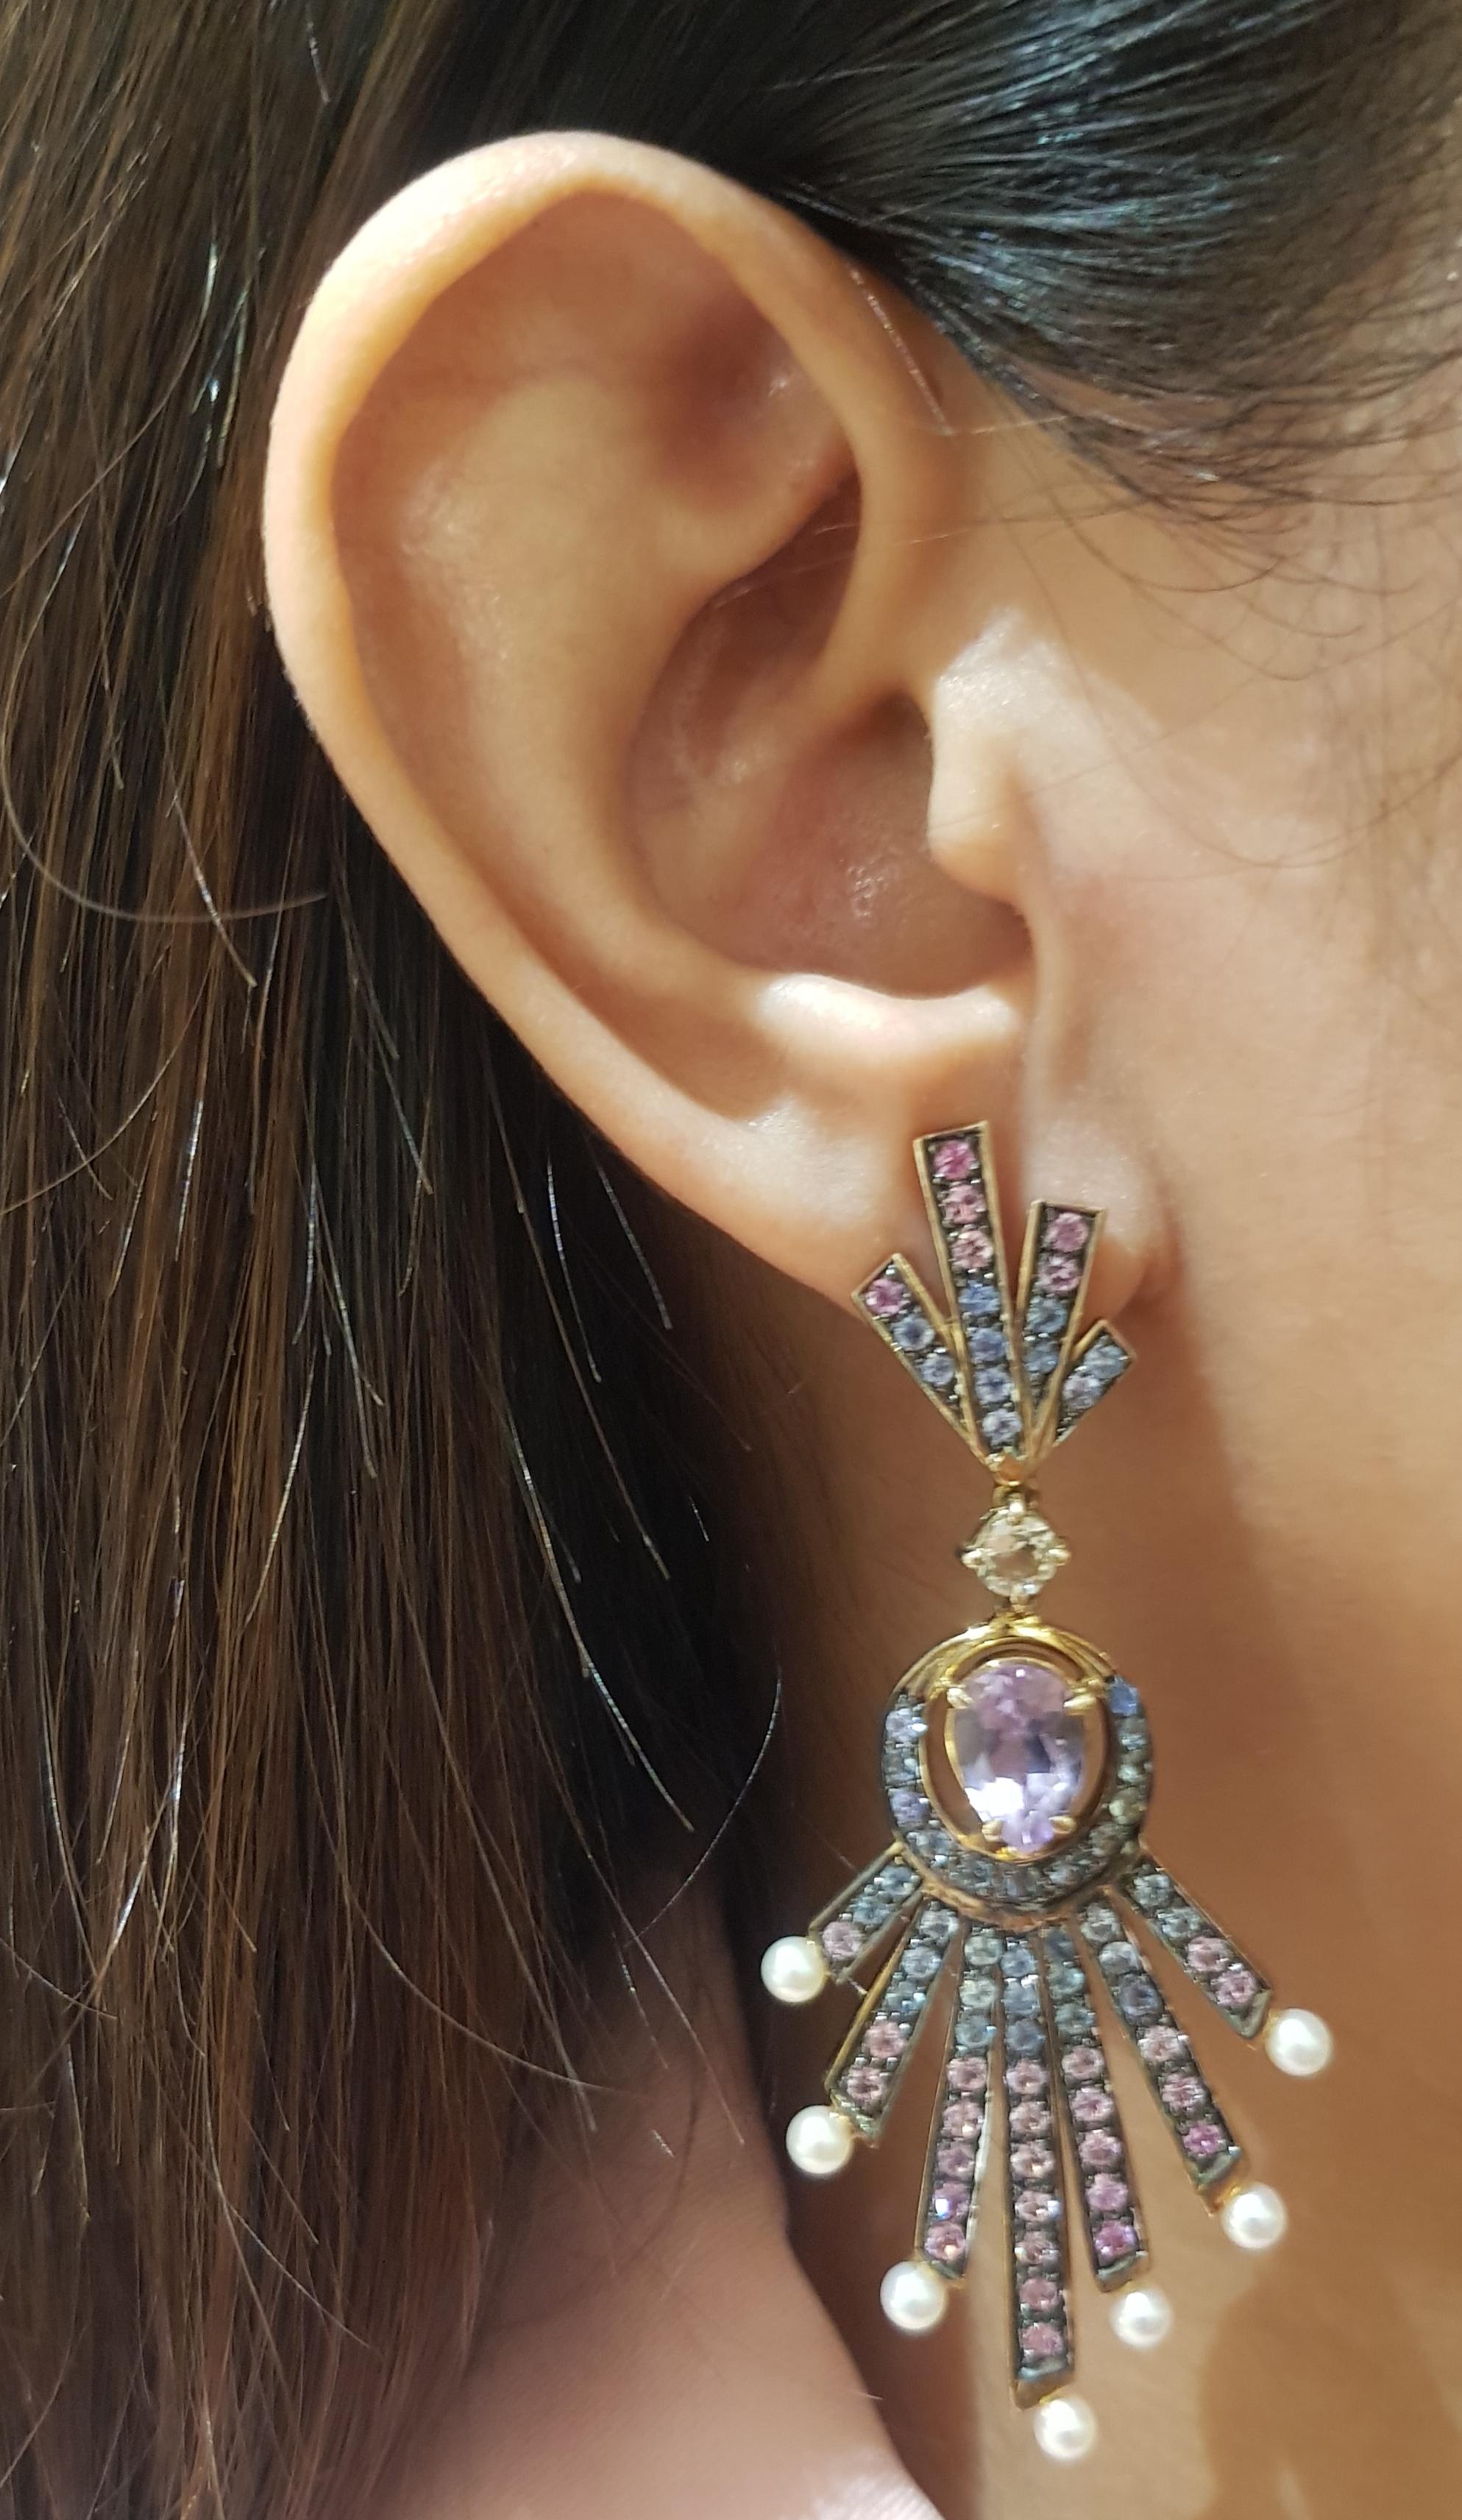 Pink Amethyst, Pink Sapphire, Blue Sapphire and Pearl Earrings set in Silver Settings

Width:  3.2 cm 
Length:7.9 cm
Total Weight: 19.3 grams

*Please note that the silver setting is plated with gold and rhodium to promote shine and help prevent